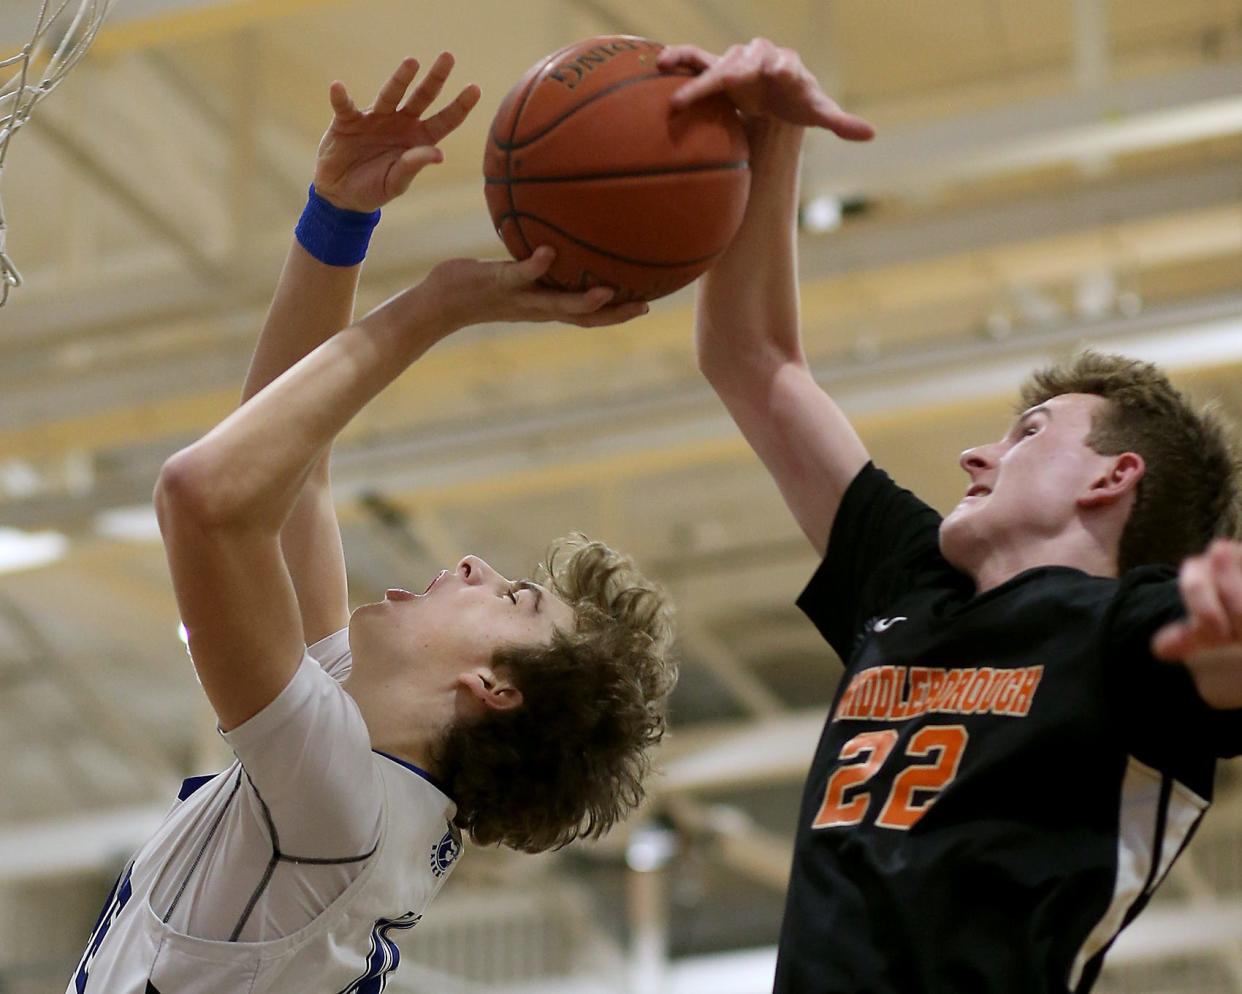 Middleborough's Matt Youngquist appears to block the shot of Scituate's Michael Porter during first quarter action of their game in the Round of 32 game in the Division 2 state tournament at Scituate High on Thursday, March 2, 2023.